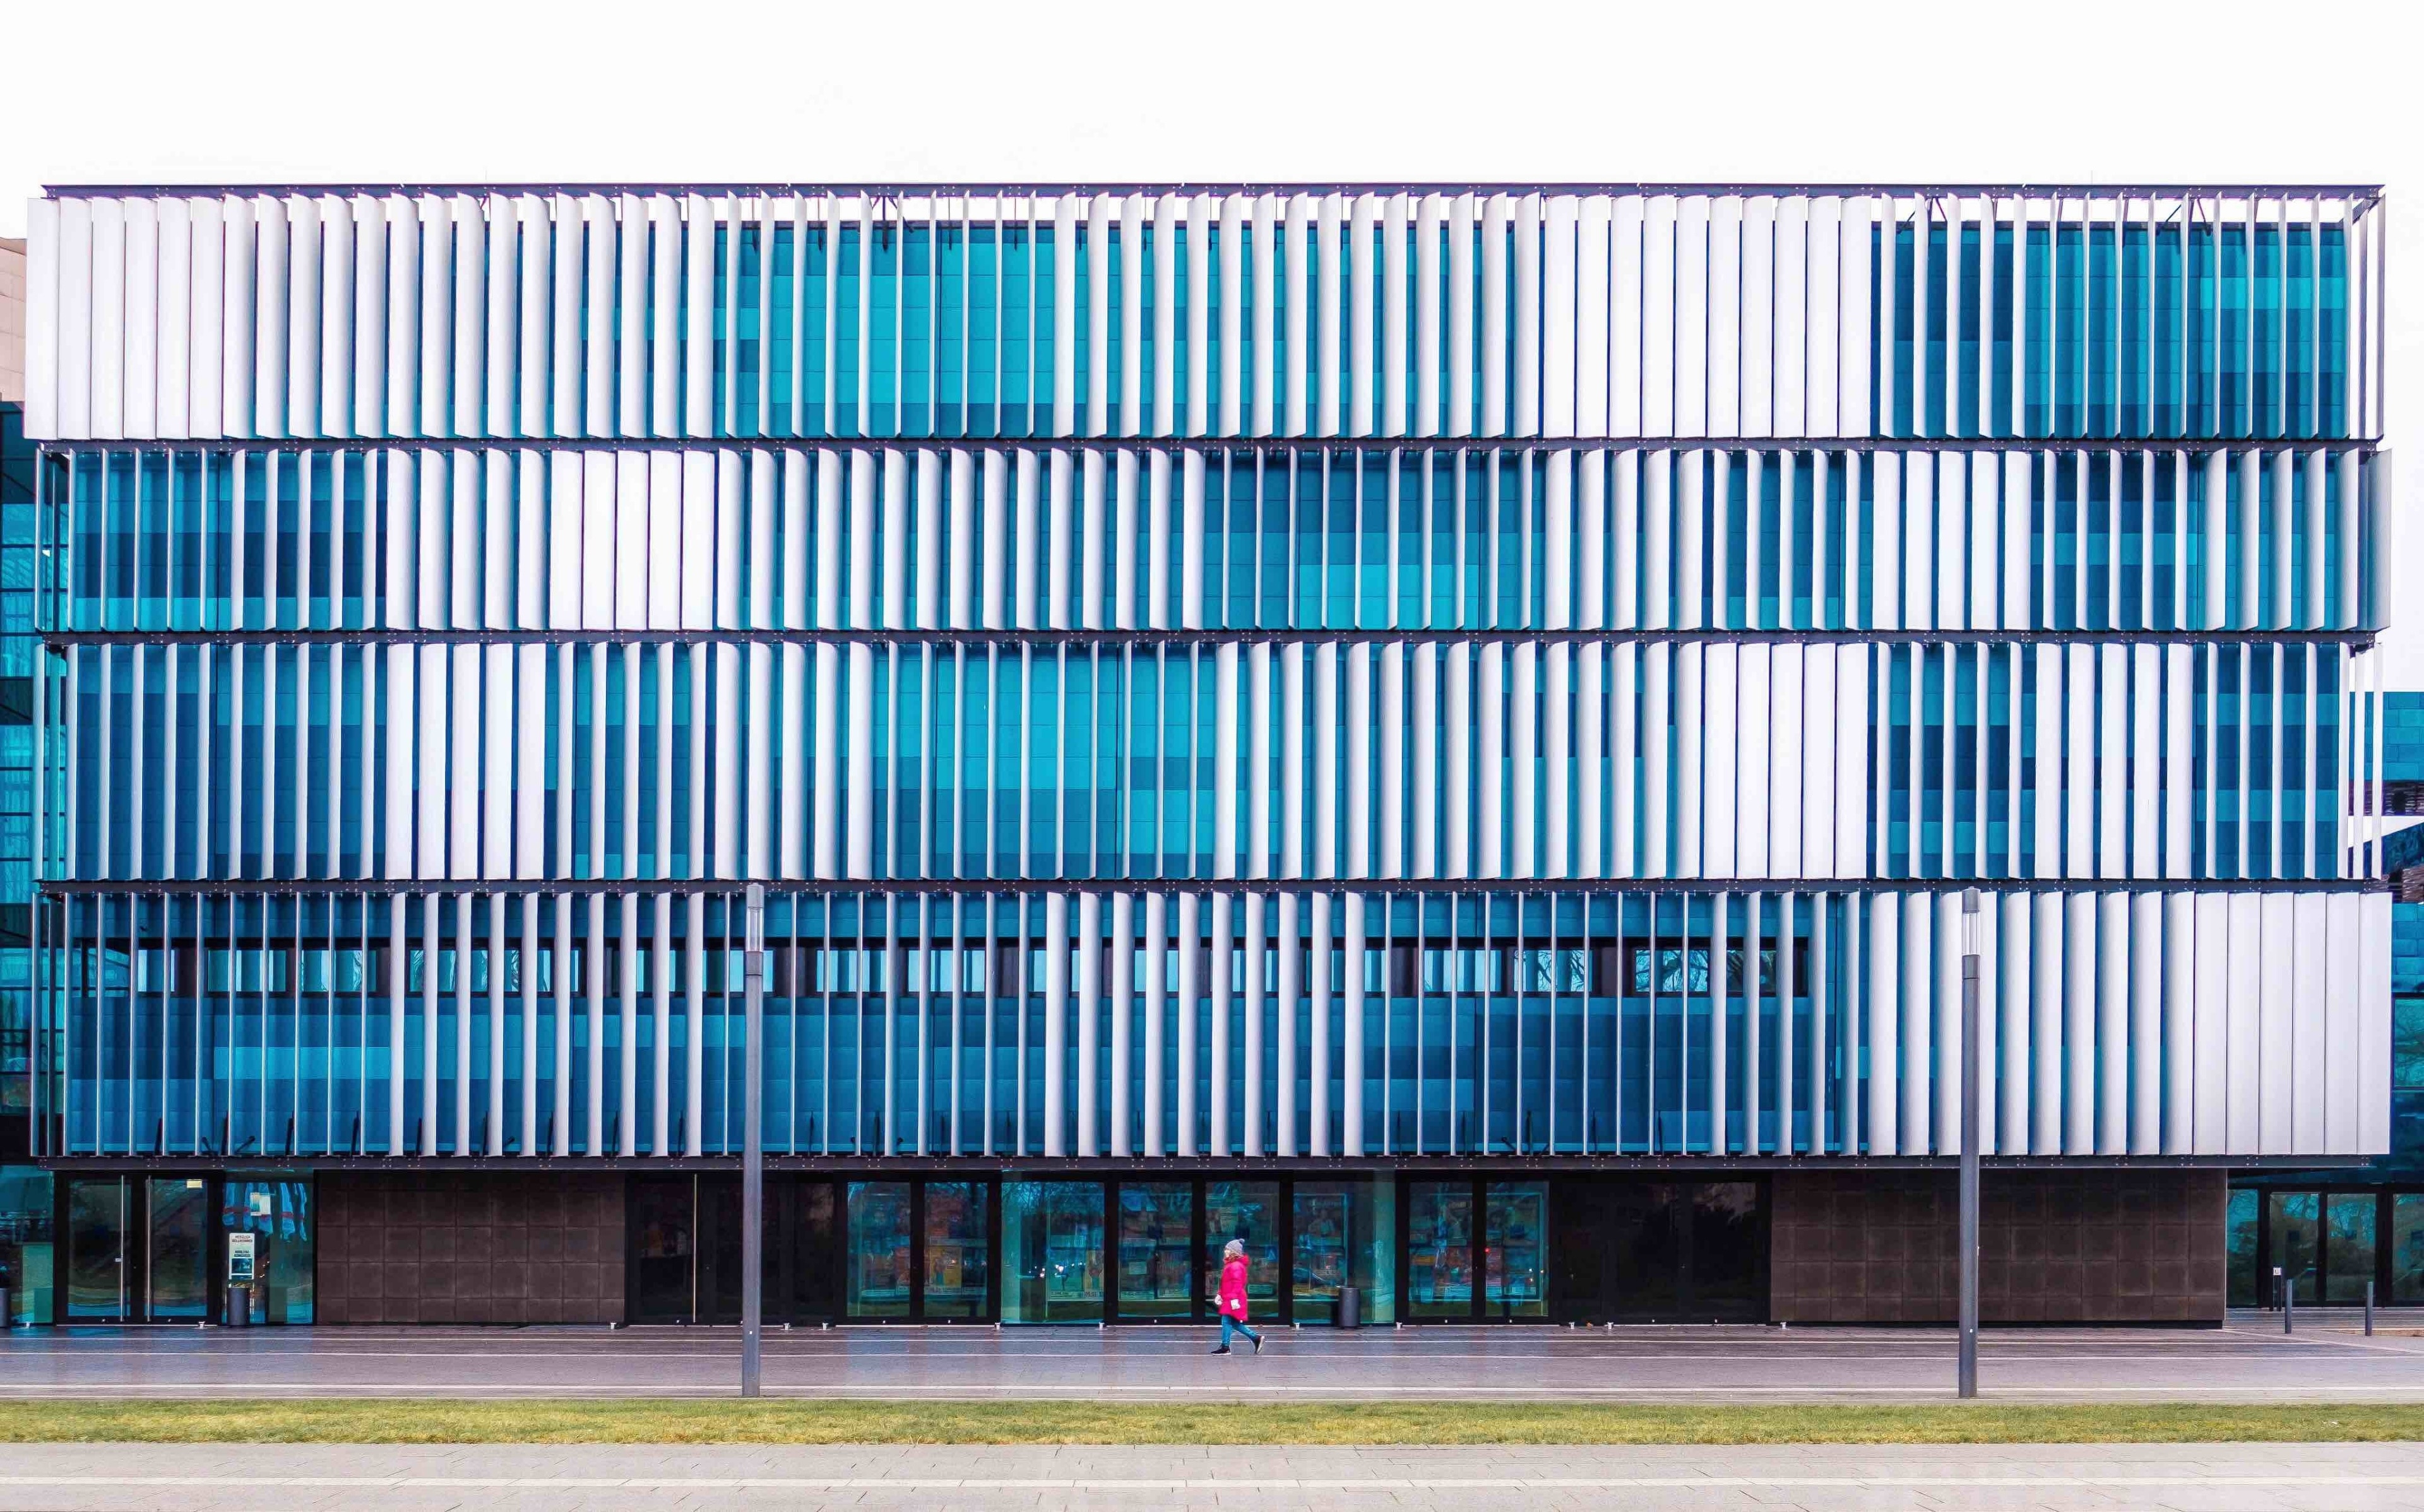 The exterior of the Rhein Mose Halle has a nice white and blue pattern. Interesting for #architecture photography